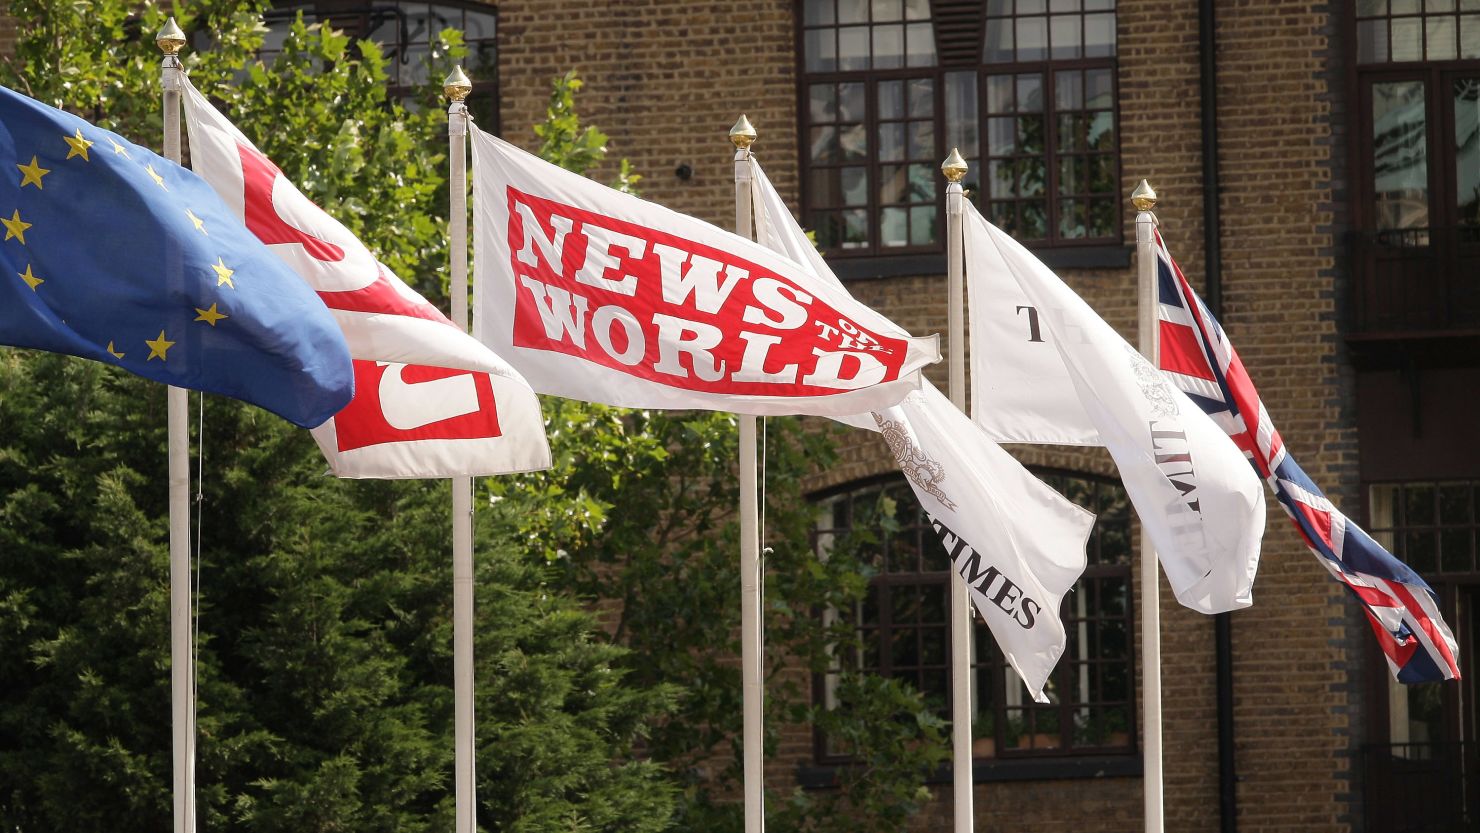 News of the World closed last summer amid public outcry over allegations of widespread phone hacking by employees. 